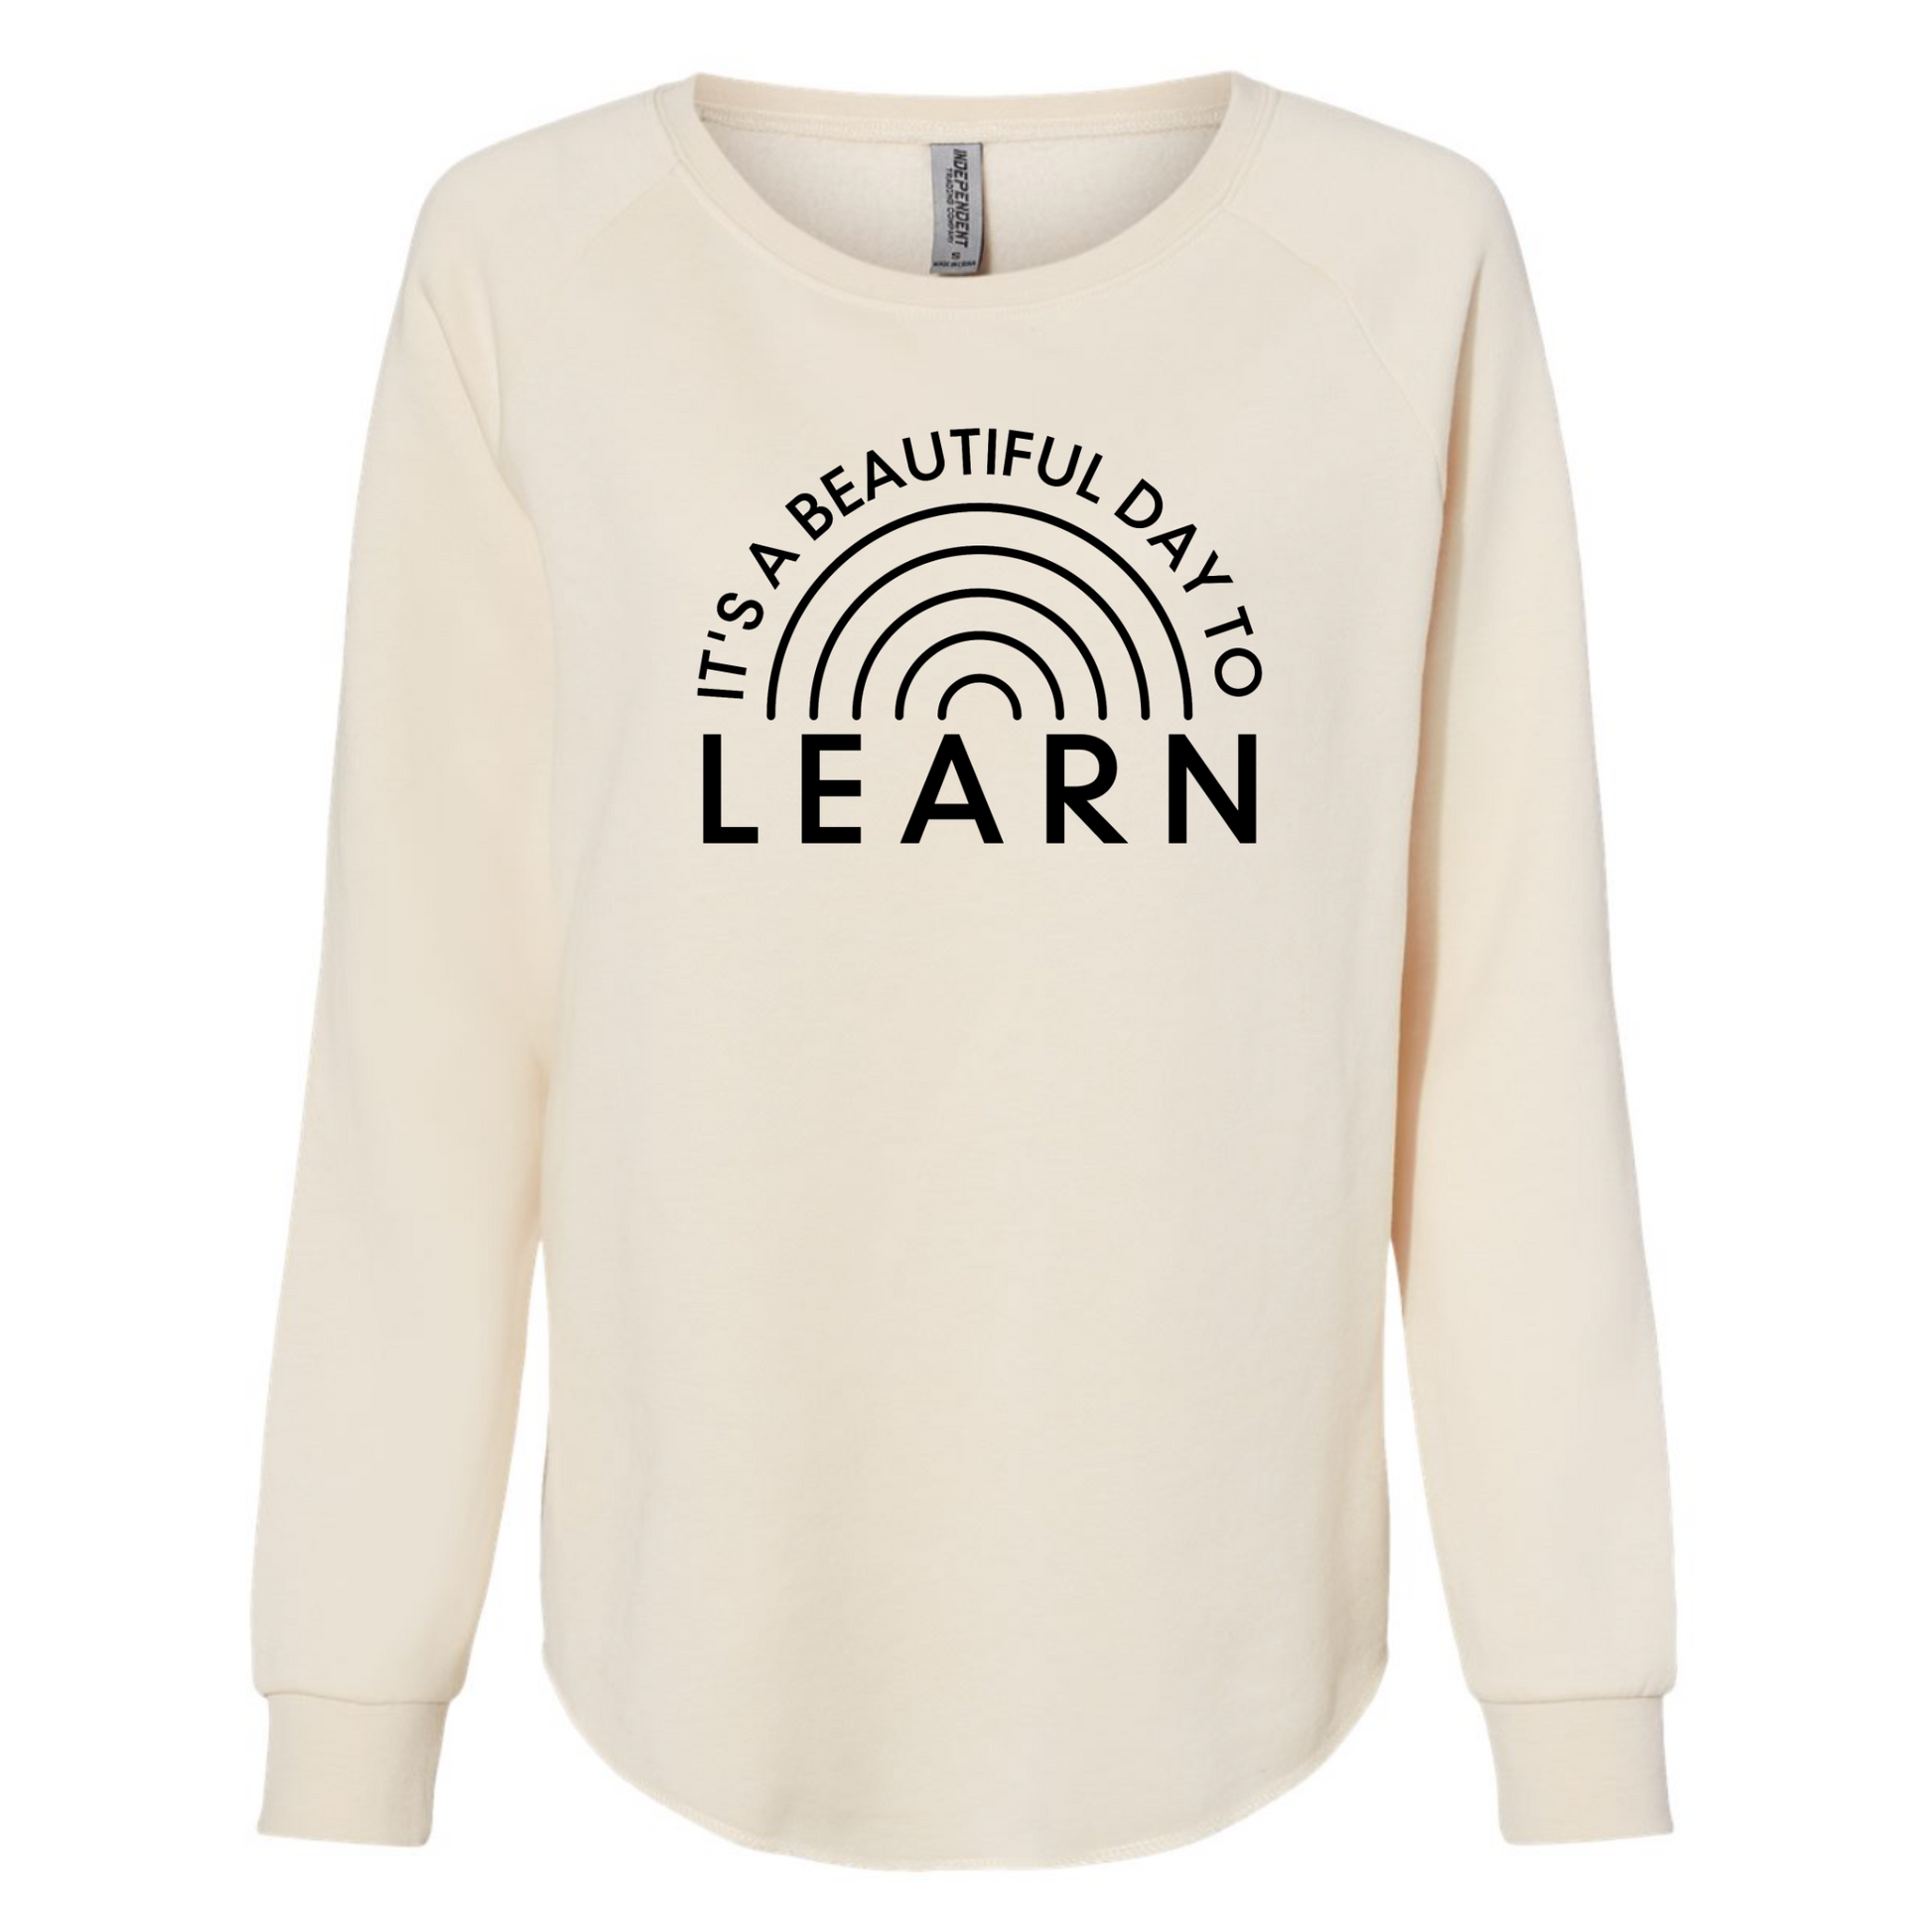 It's A Beautiful Day To Learn Crewneck Sweatshirt in cream - front view.